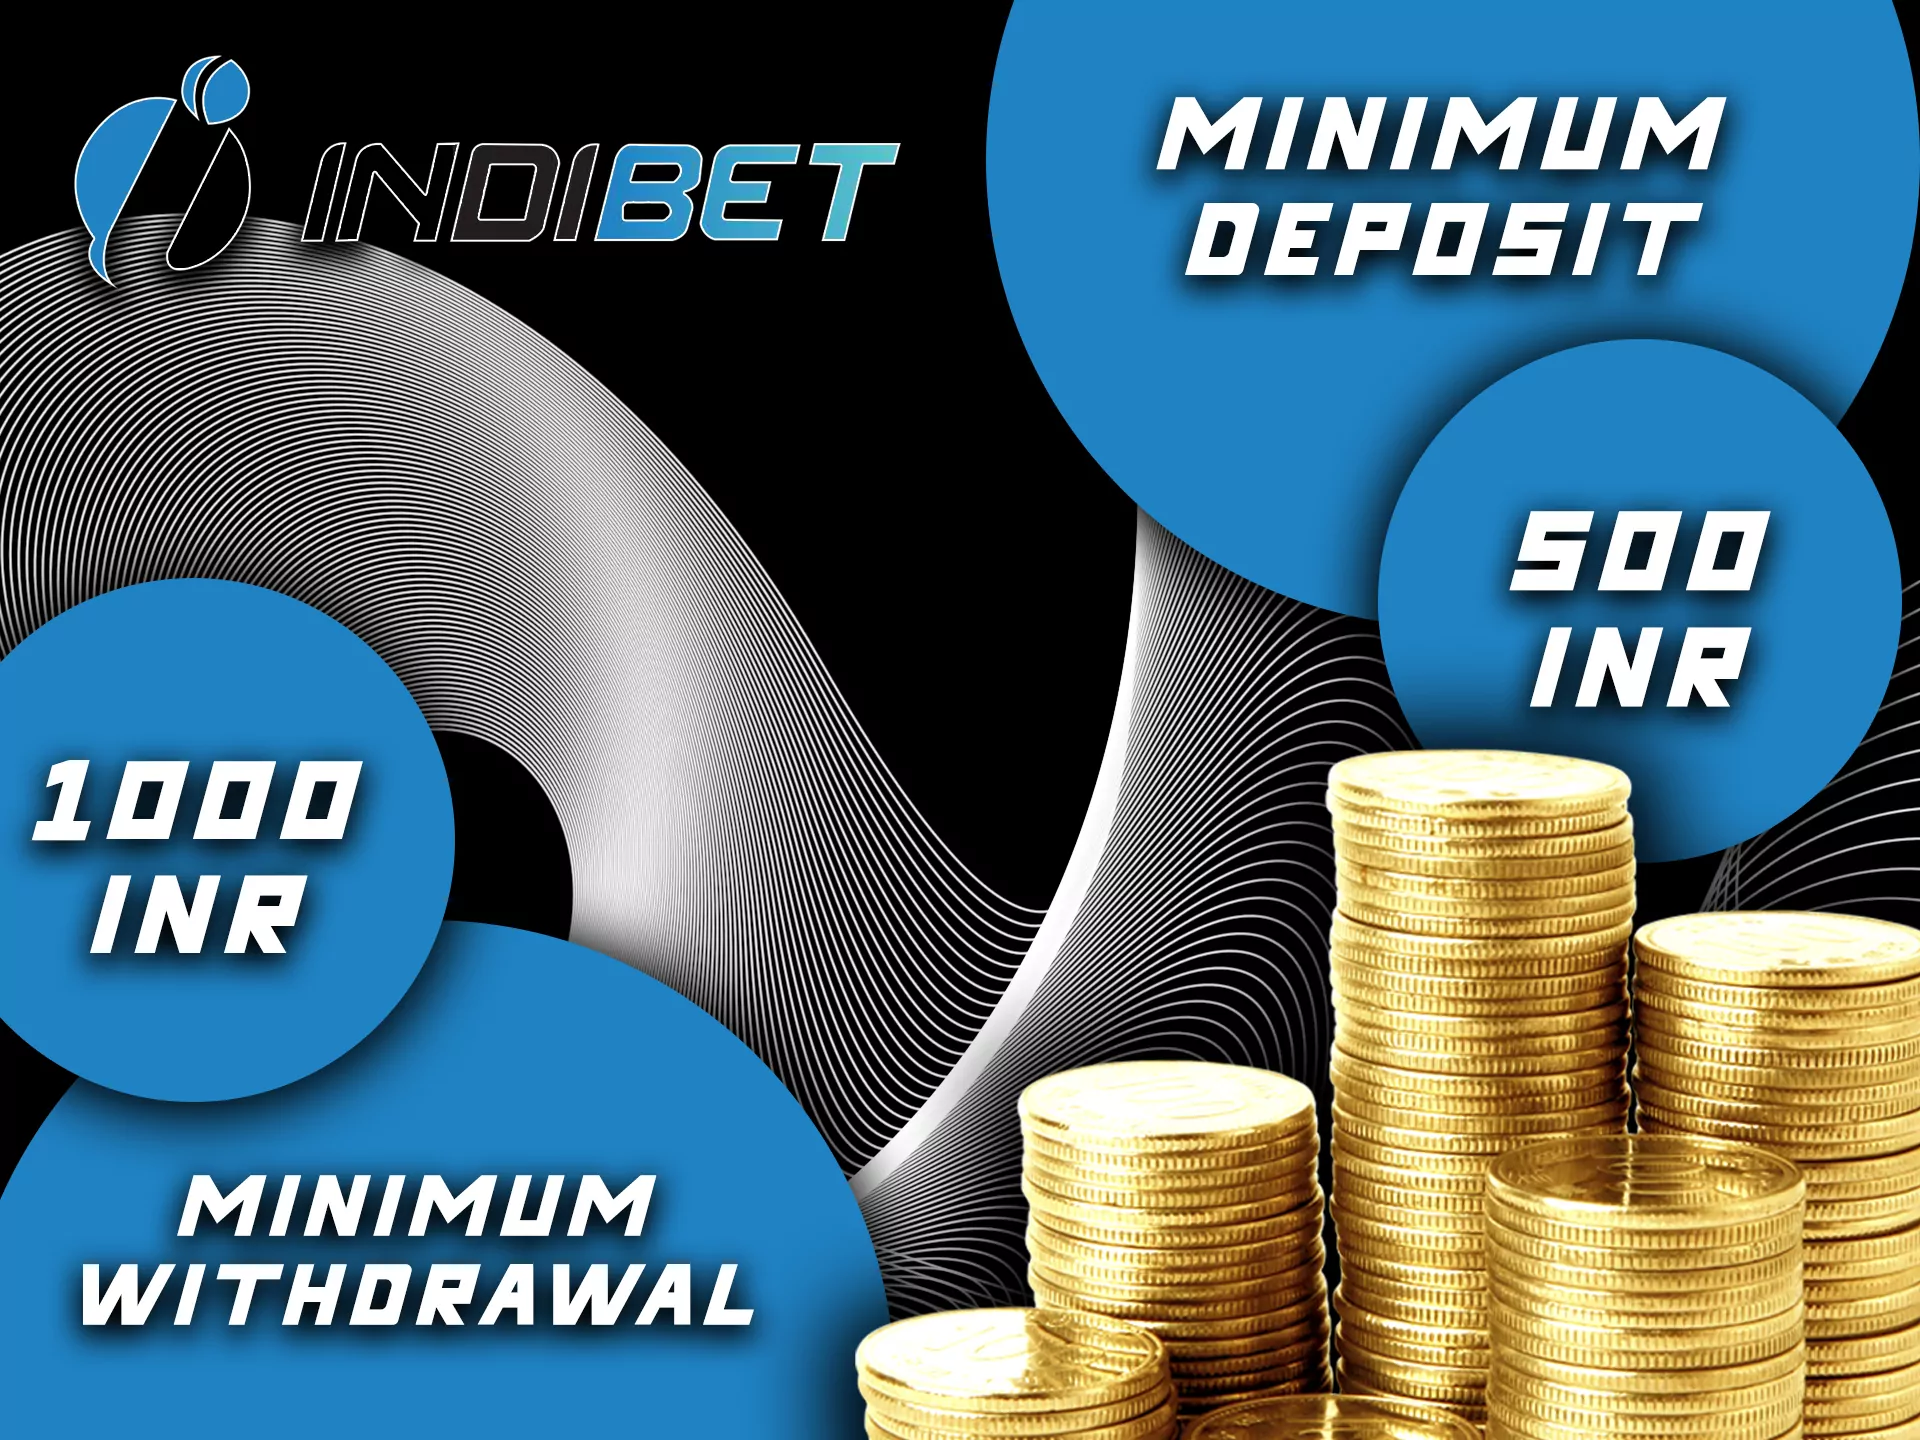 You should deposit at least 500 INR to Indibet.